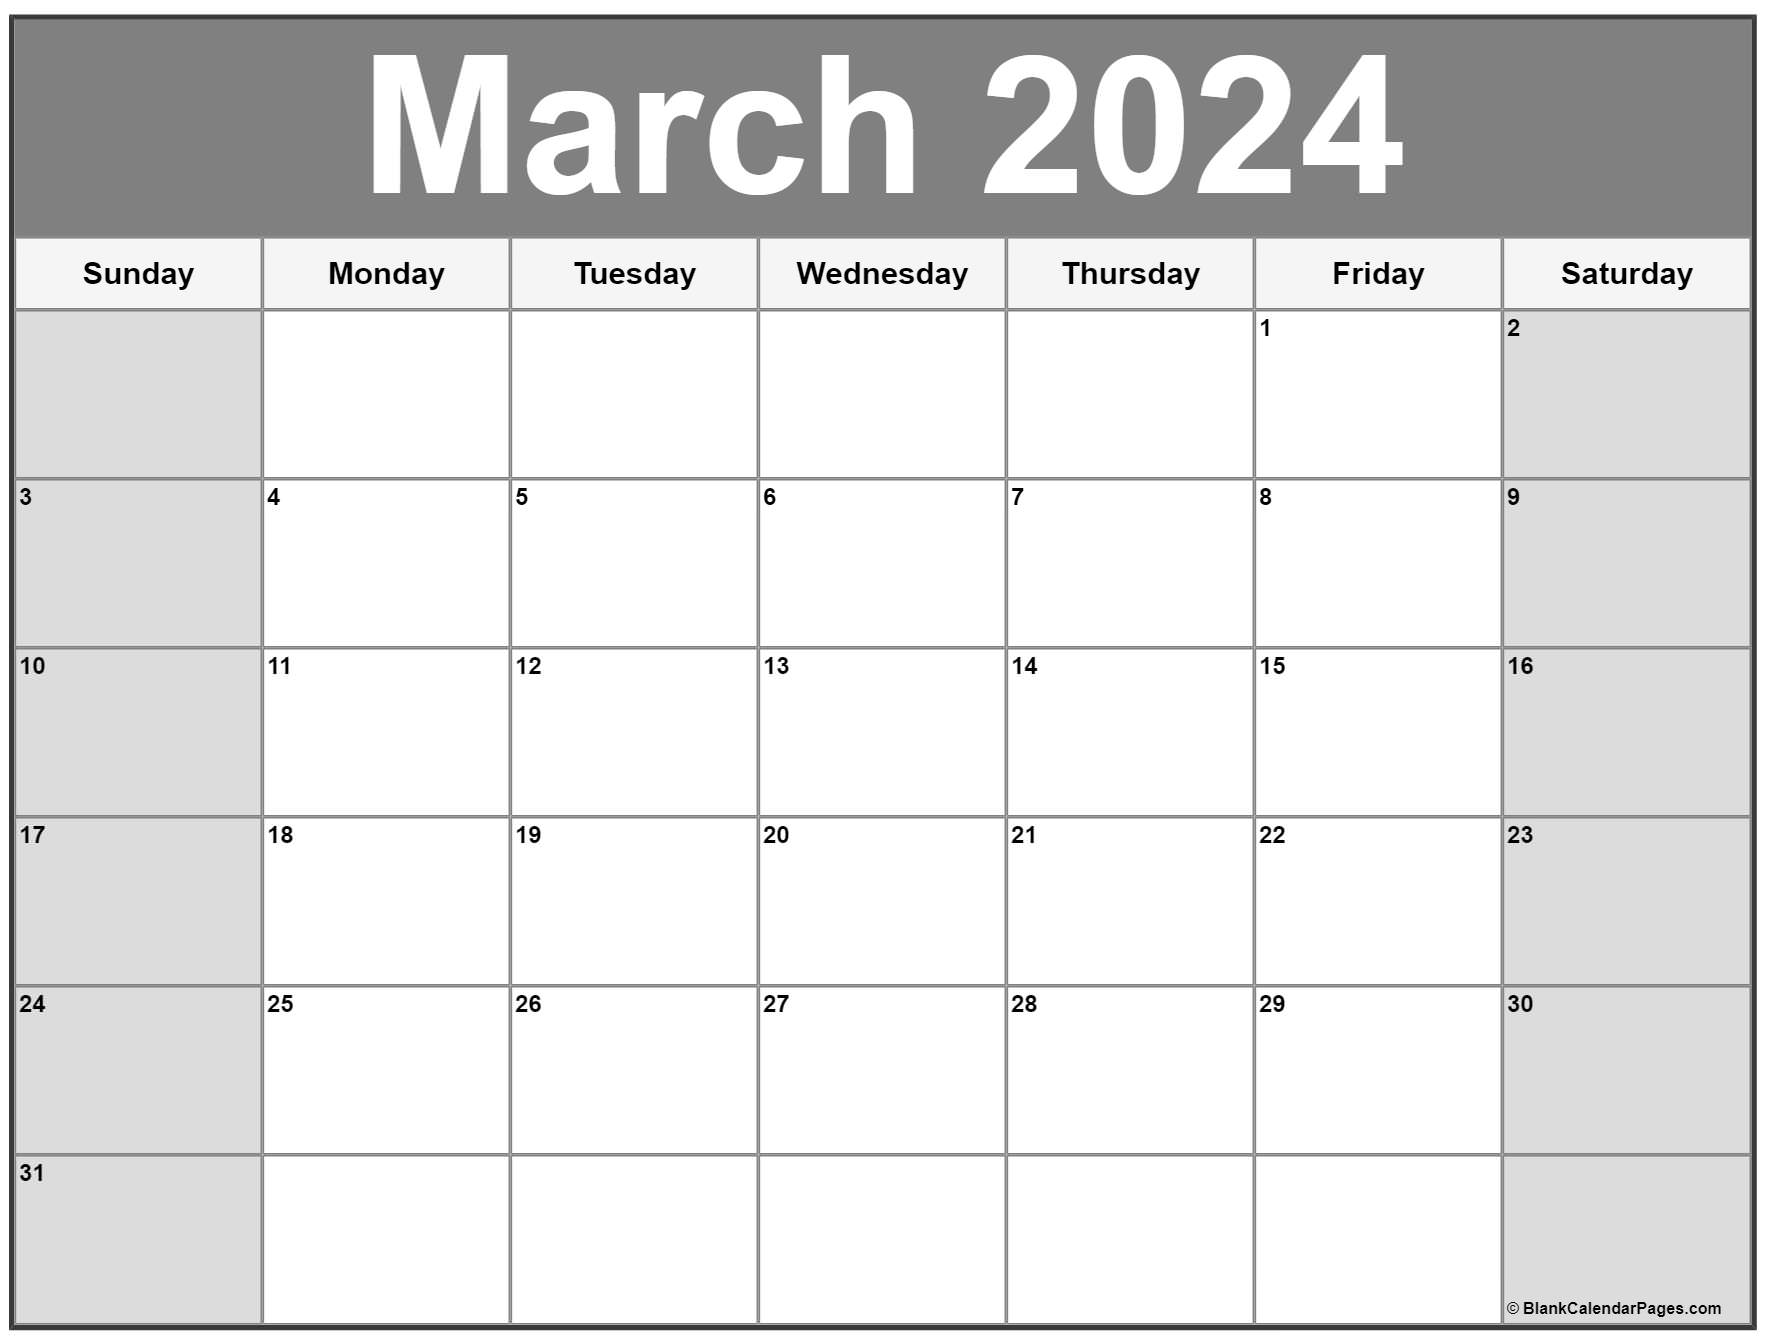 March 2022 calendar | free printable monthly calendars